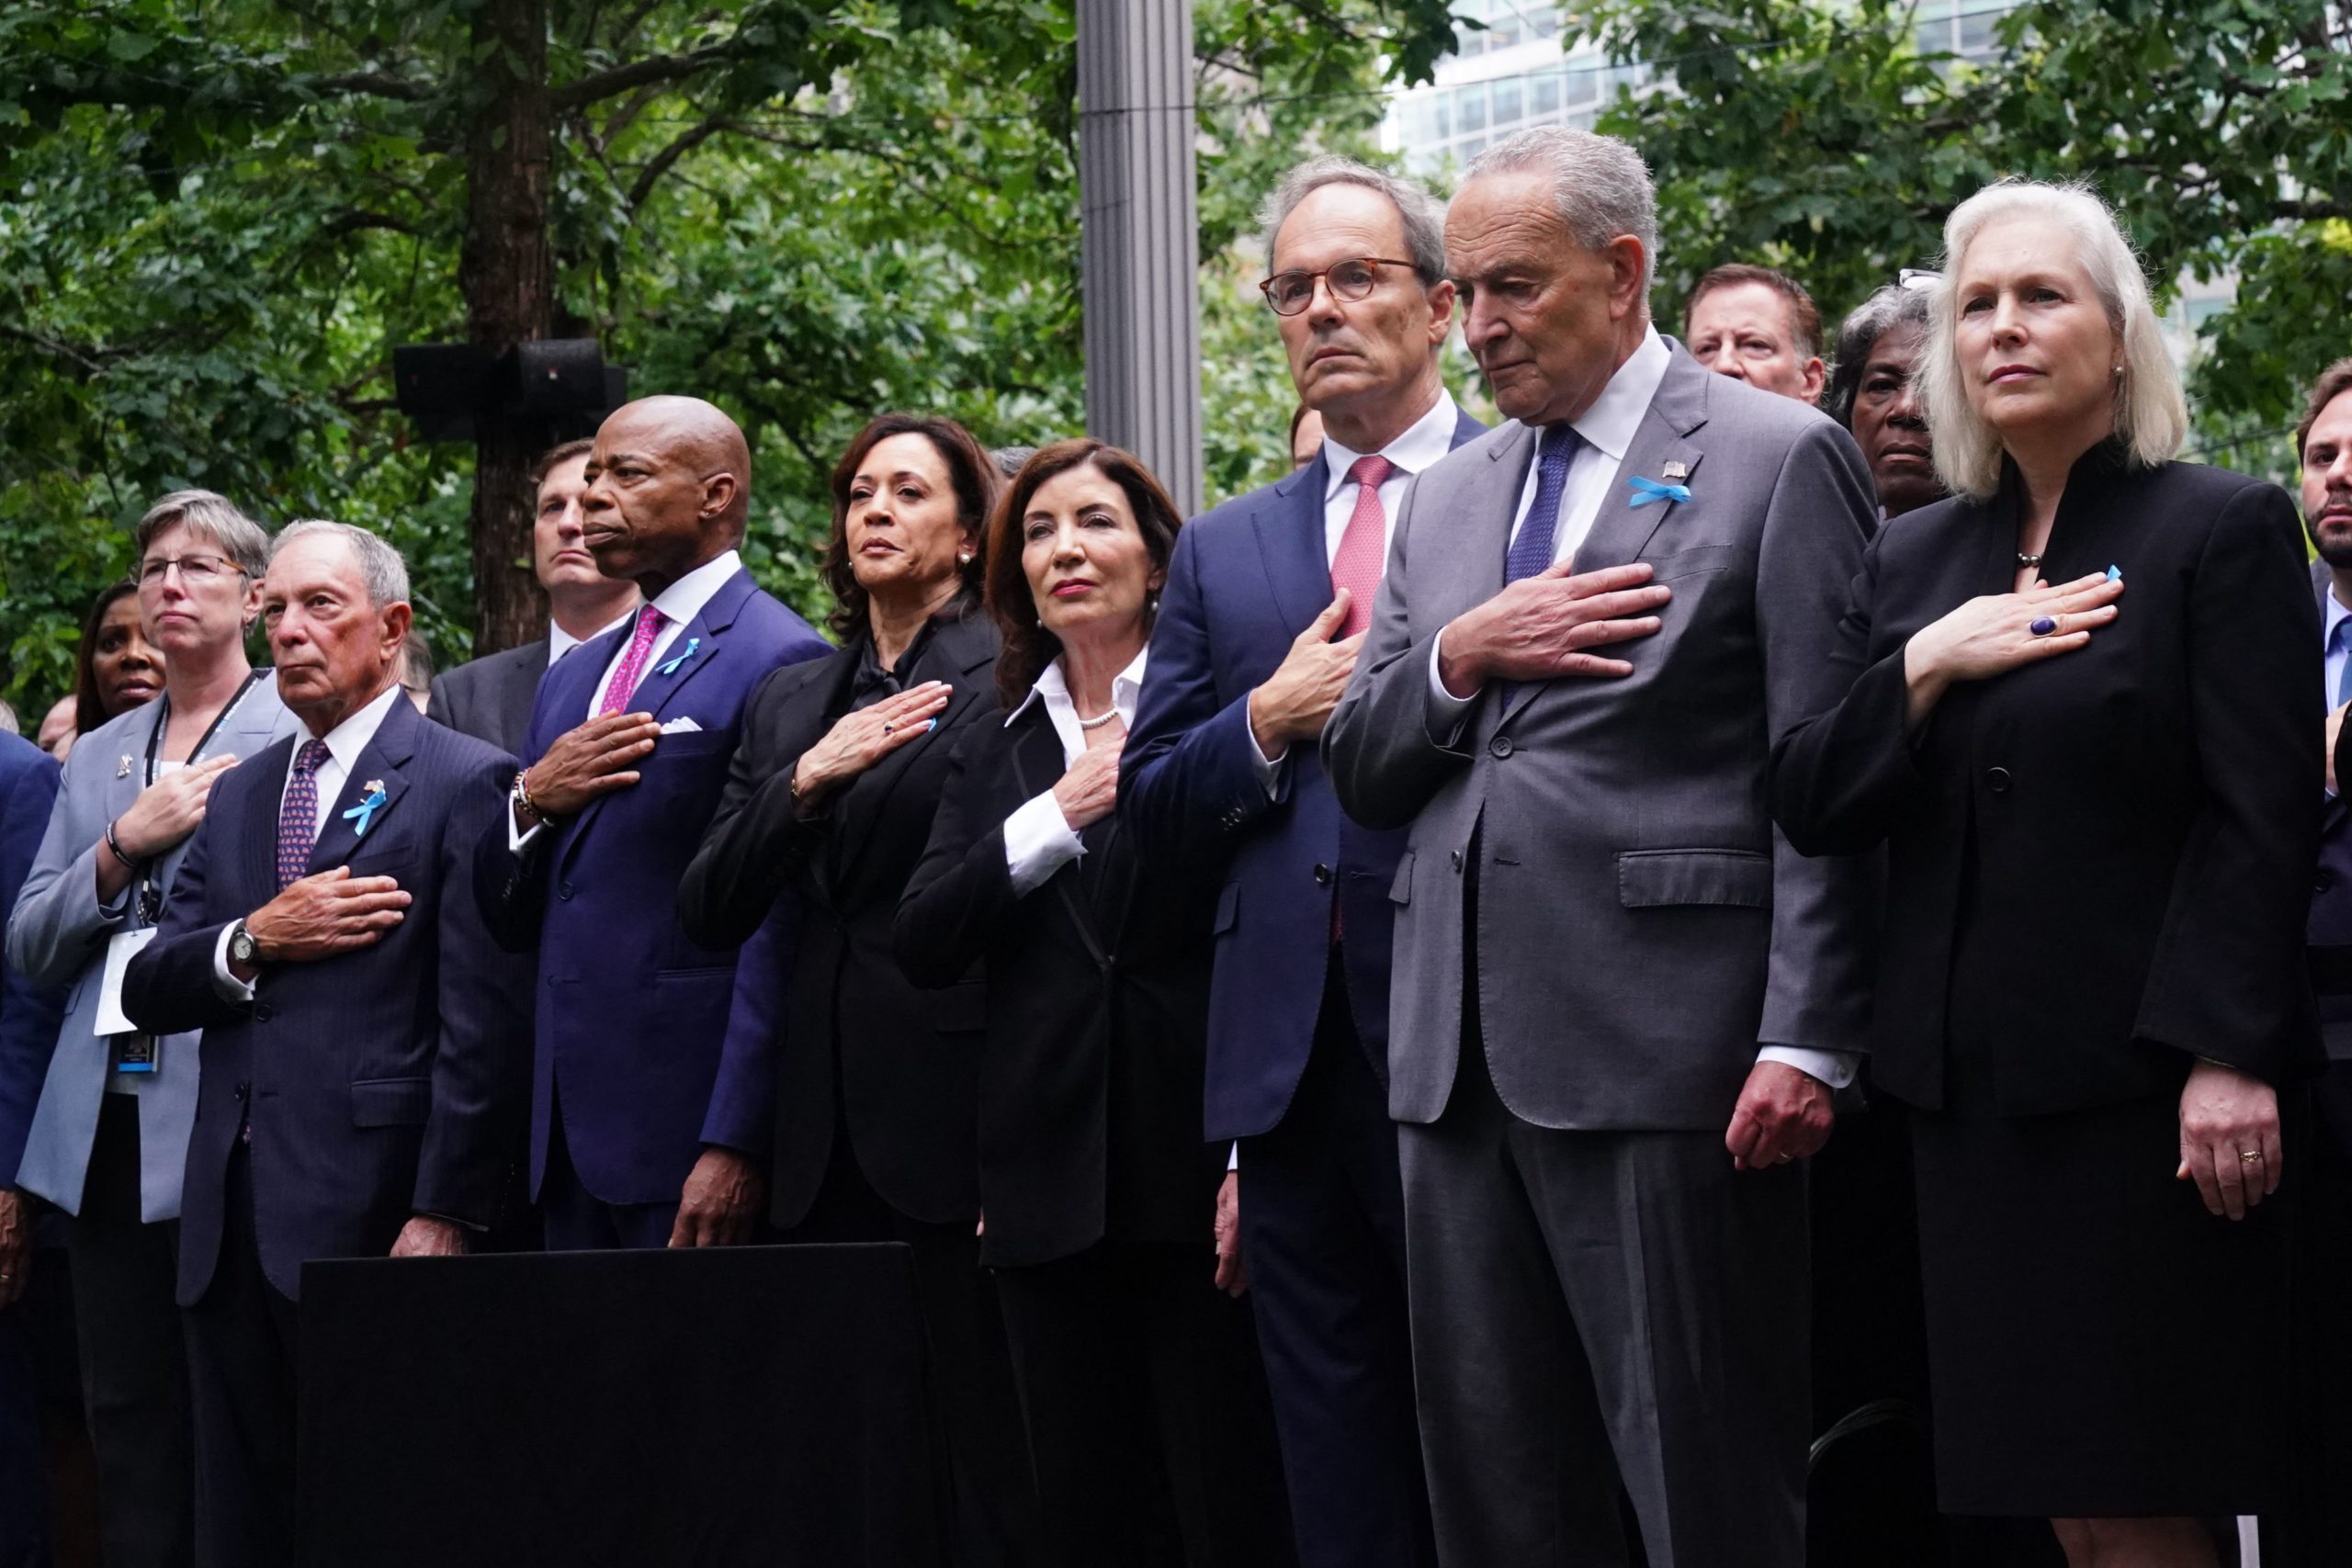 (L-R) Former New York City Mayor Michael Bloomberg, New York City Mayor Eric Adams, US Vice President Kamala Harris, New York Governor Kathy Hochul, Senate Majority Leader Chuck Schumer (D-NY), and US Senator Kirsten Gillibrand (D-NY) attend a remembrance ceremony on the 22nd anniversary of the terror attack on the World Trade Center, in New York City on September 11, 2023. (Photo by Bryan R. Smith / AFP) (Photo by BRYAN R. SMITH/AFP via Getty Images)